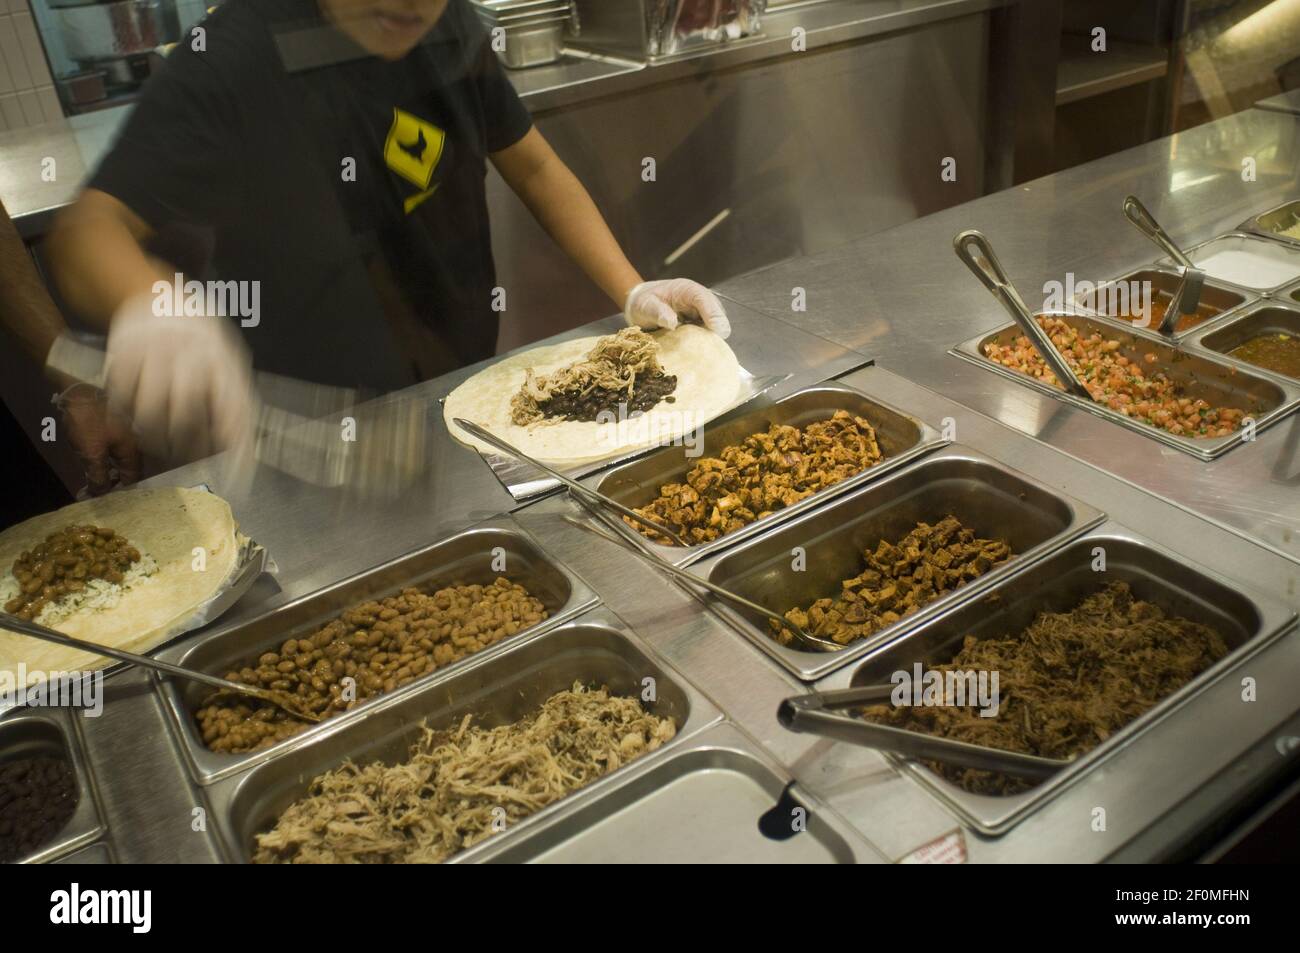 Workers prepare burritos at a Chipotle Mexican Grill in Midtown in New York  on Monday, December 7, 2009. Shares of Chipotle Mexican Grill plummeted on  reports of several customers contracting norovirus at